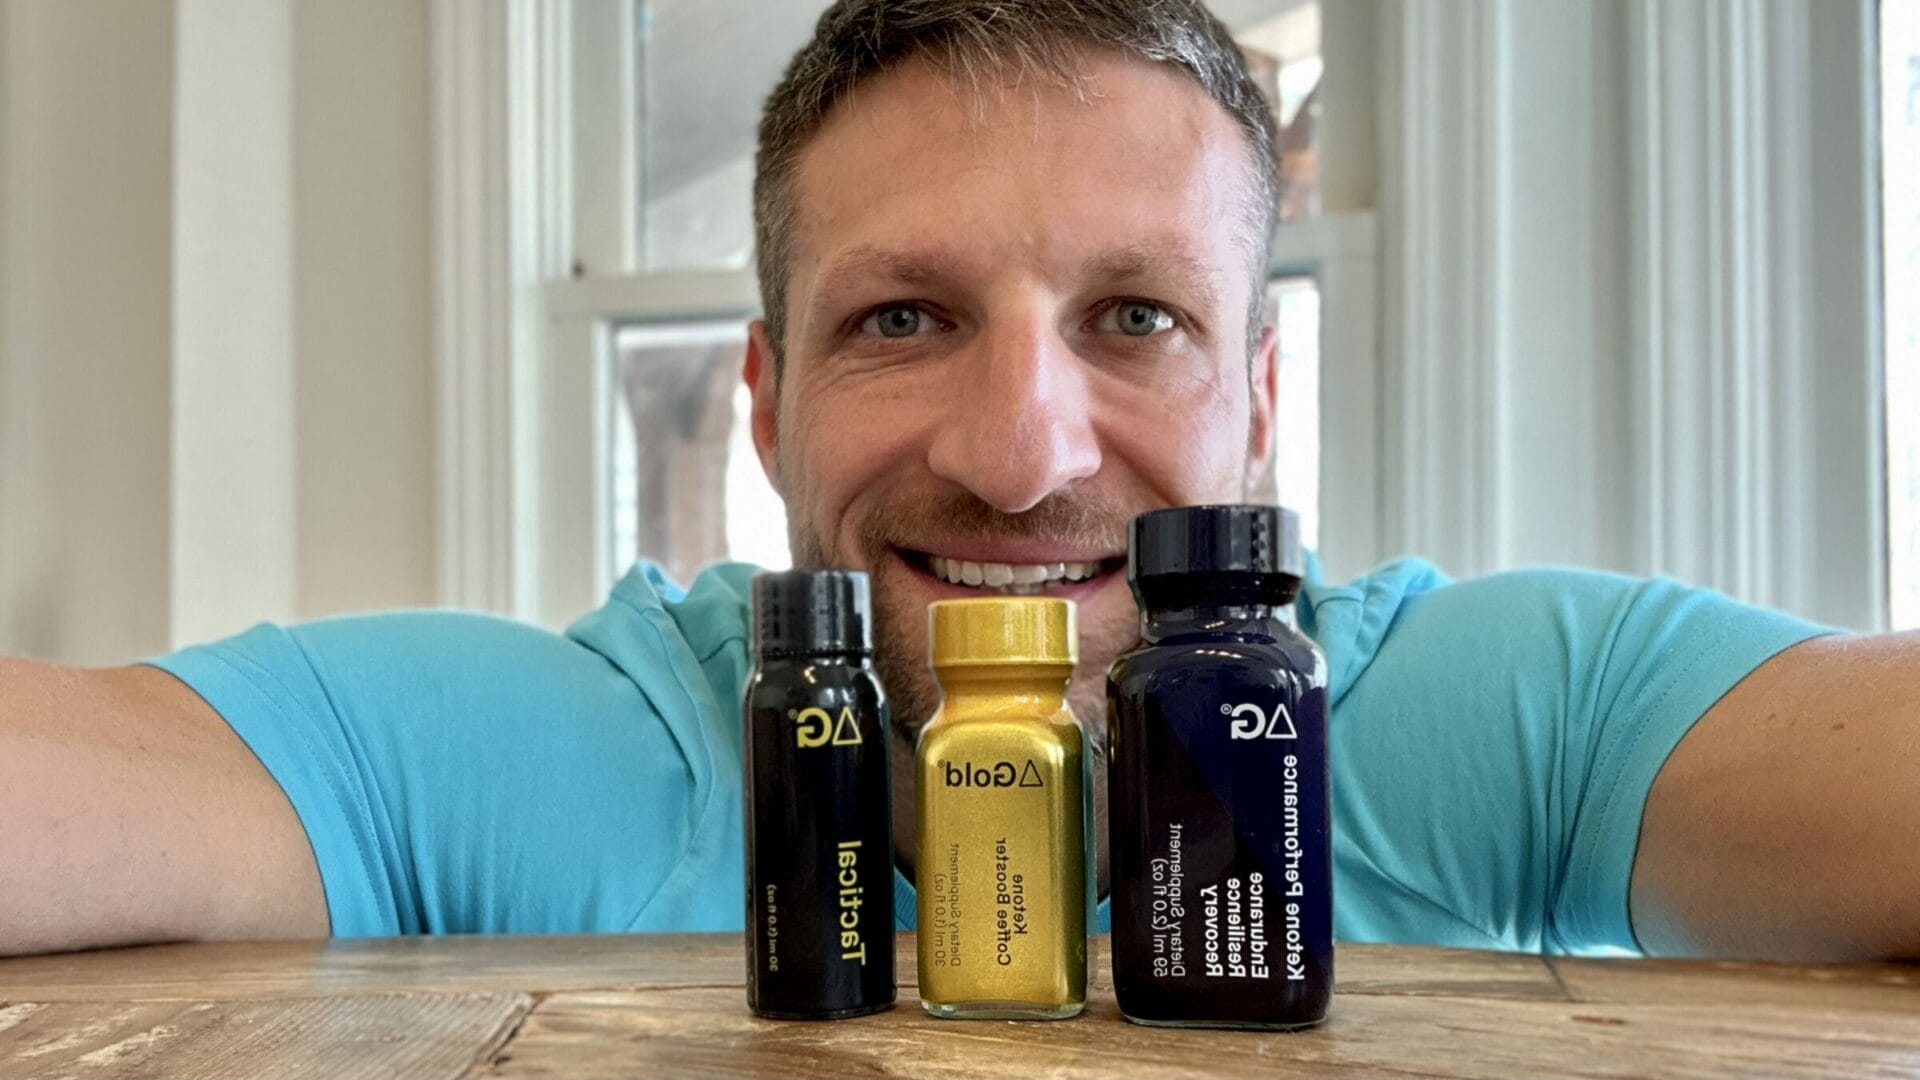 I've been using DeltaG ketones to improve my athletic and cognitive performance